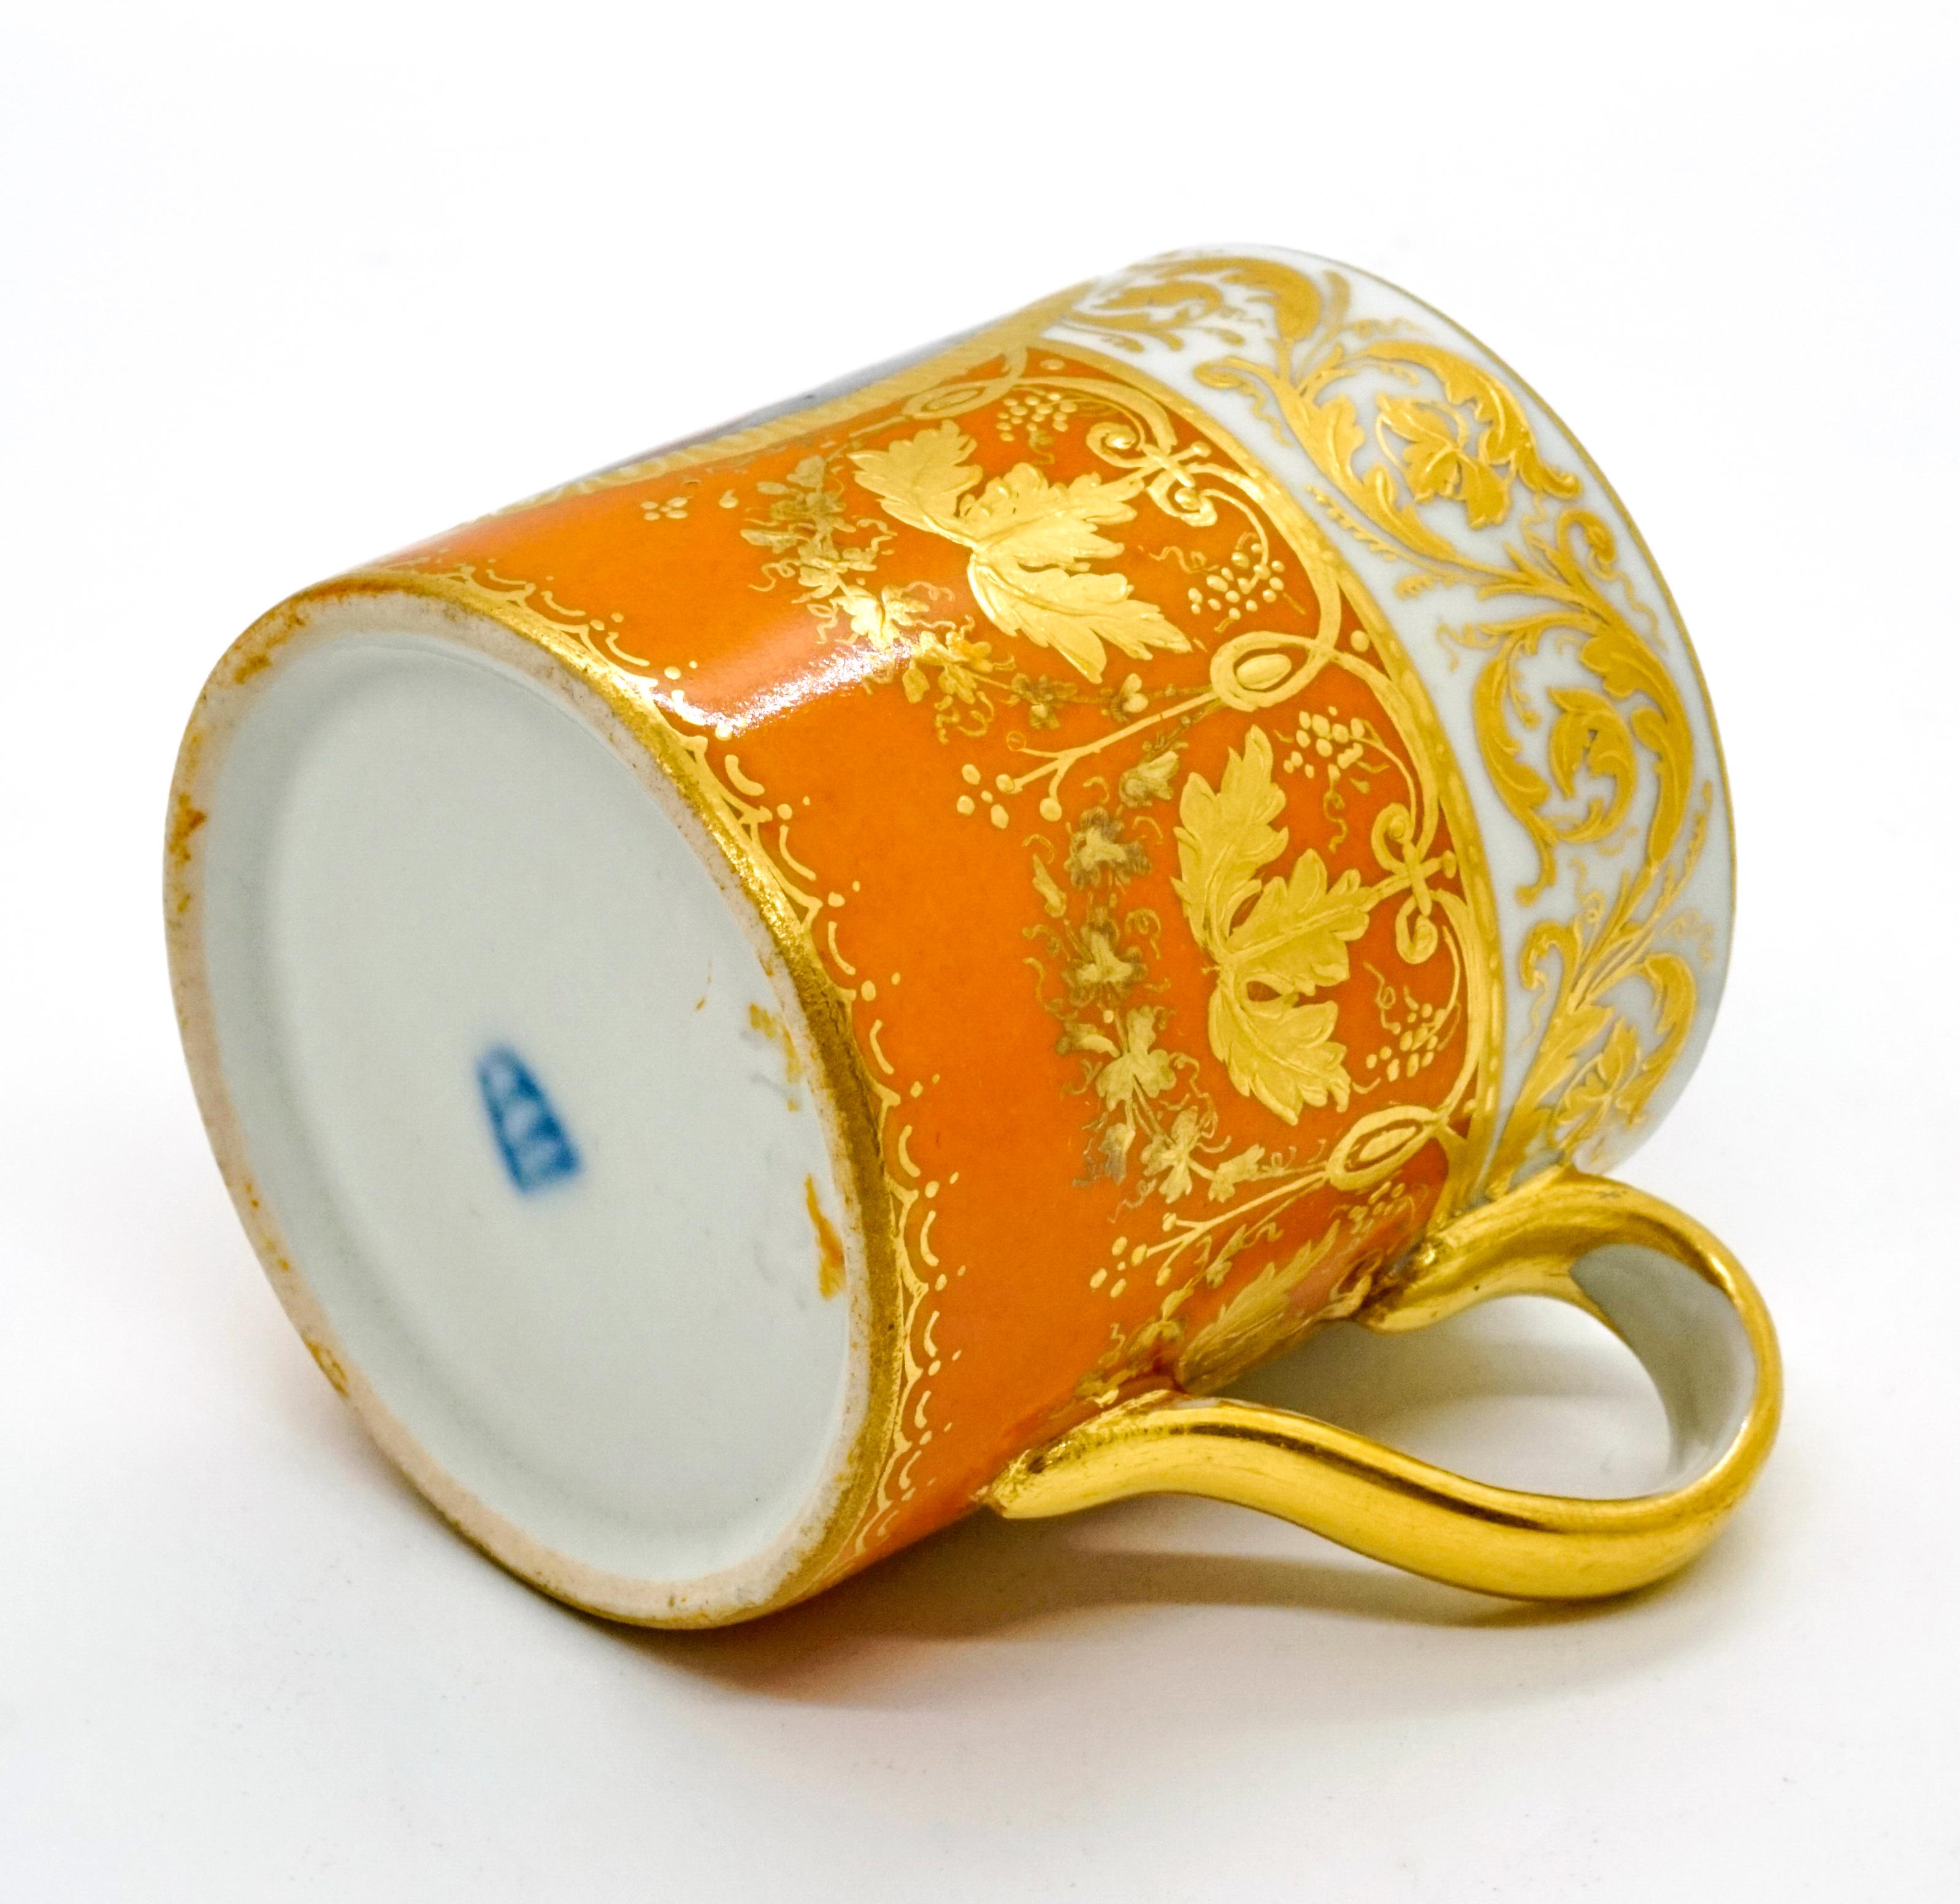 Early 19th Century Viennese Imperial Porcelain Collecting Cup Yellow and Gold with Cupids, 1825